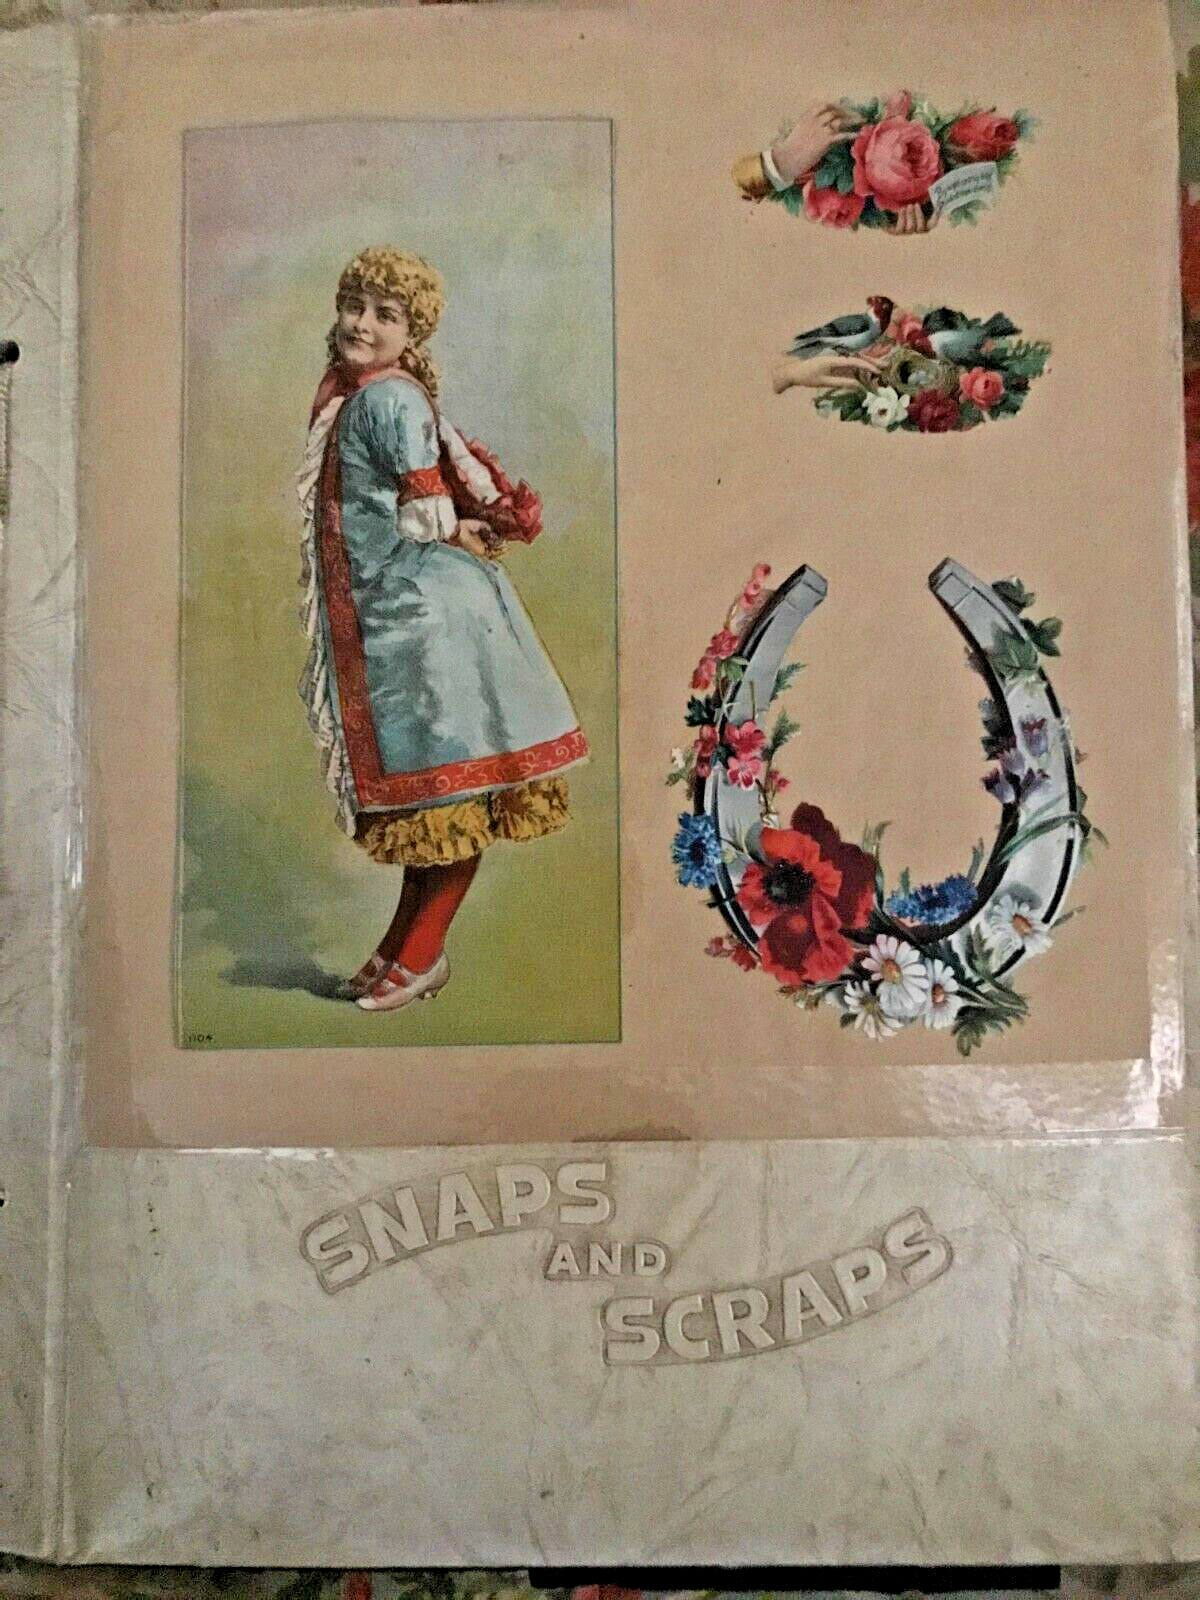 NICE- 110+ Pieces Antique Late 1800s Early 1900s Victorian Scrapbook/Trade Cards